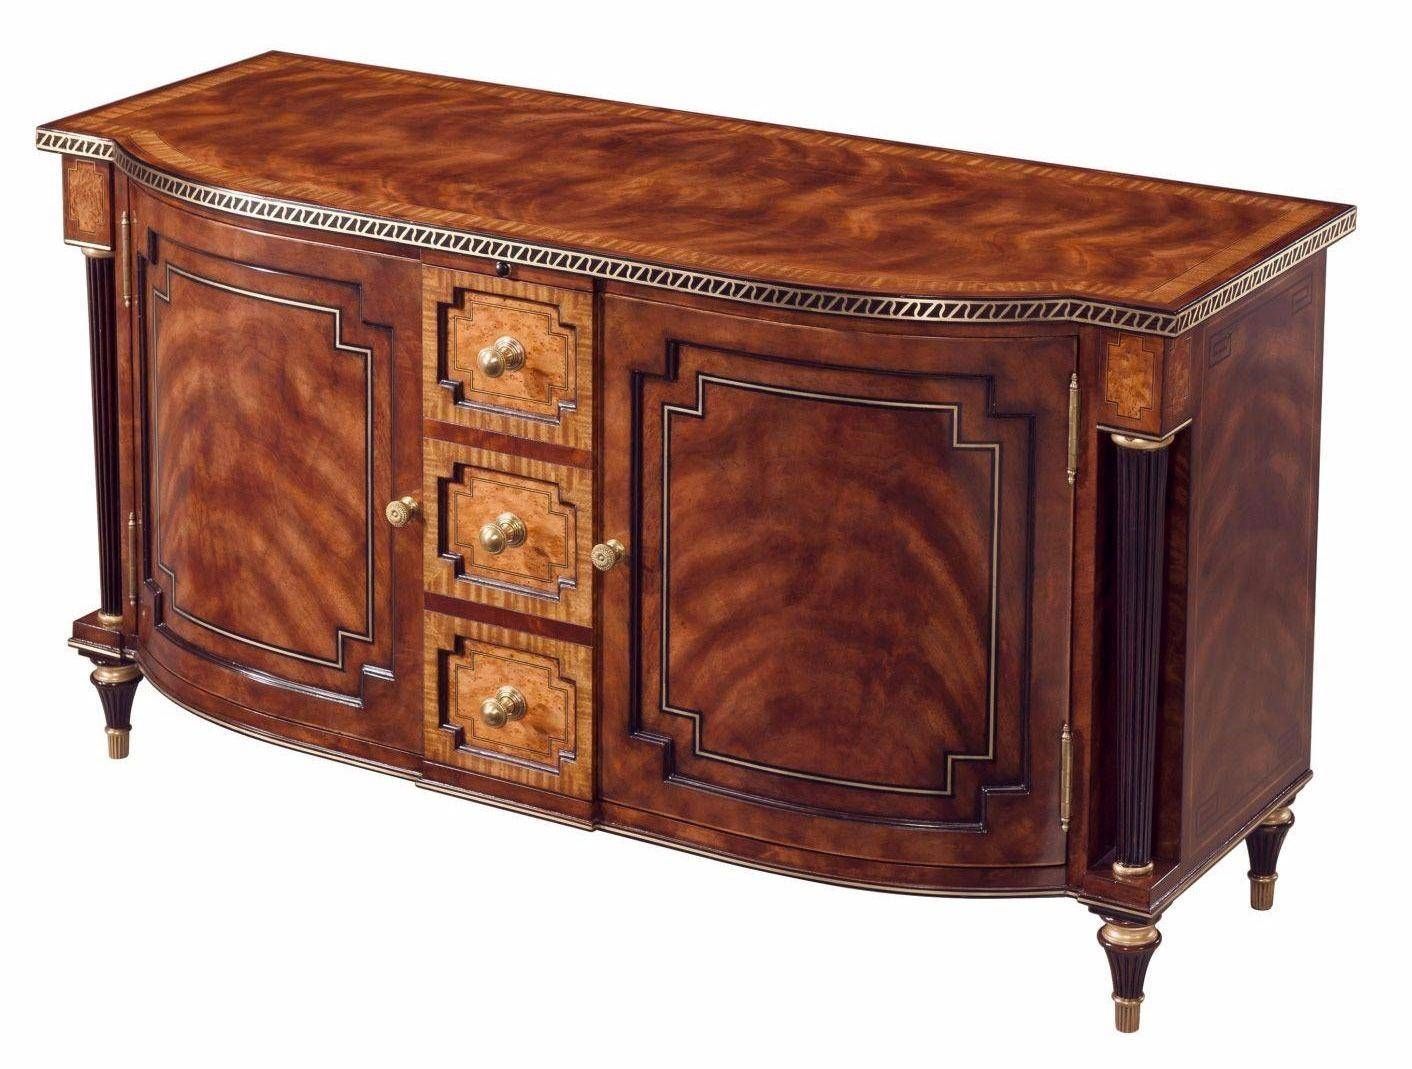 A Mahogany Veneered And Yew Burl Banded Tv Cabinet, Tv Stands From With Regard To Mahogany Tv Cabinets (View 8 of 15)